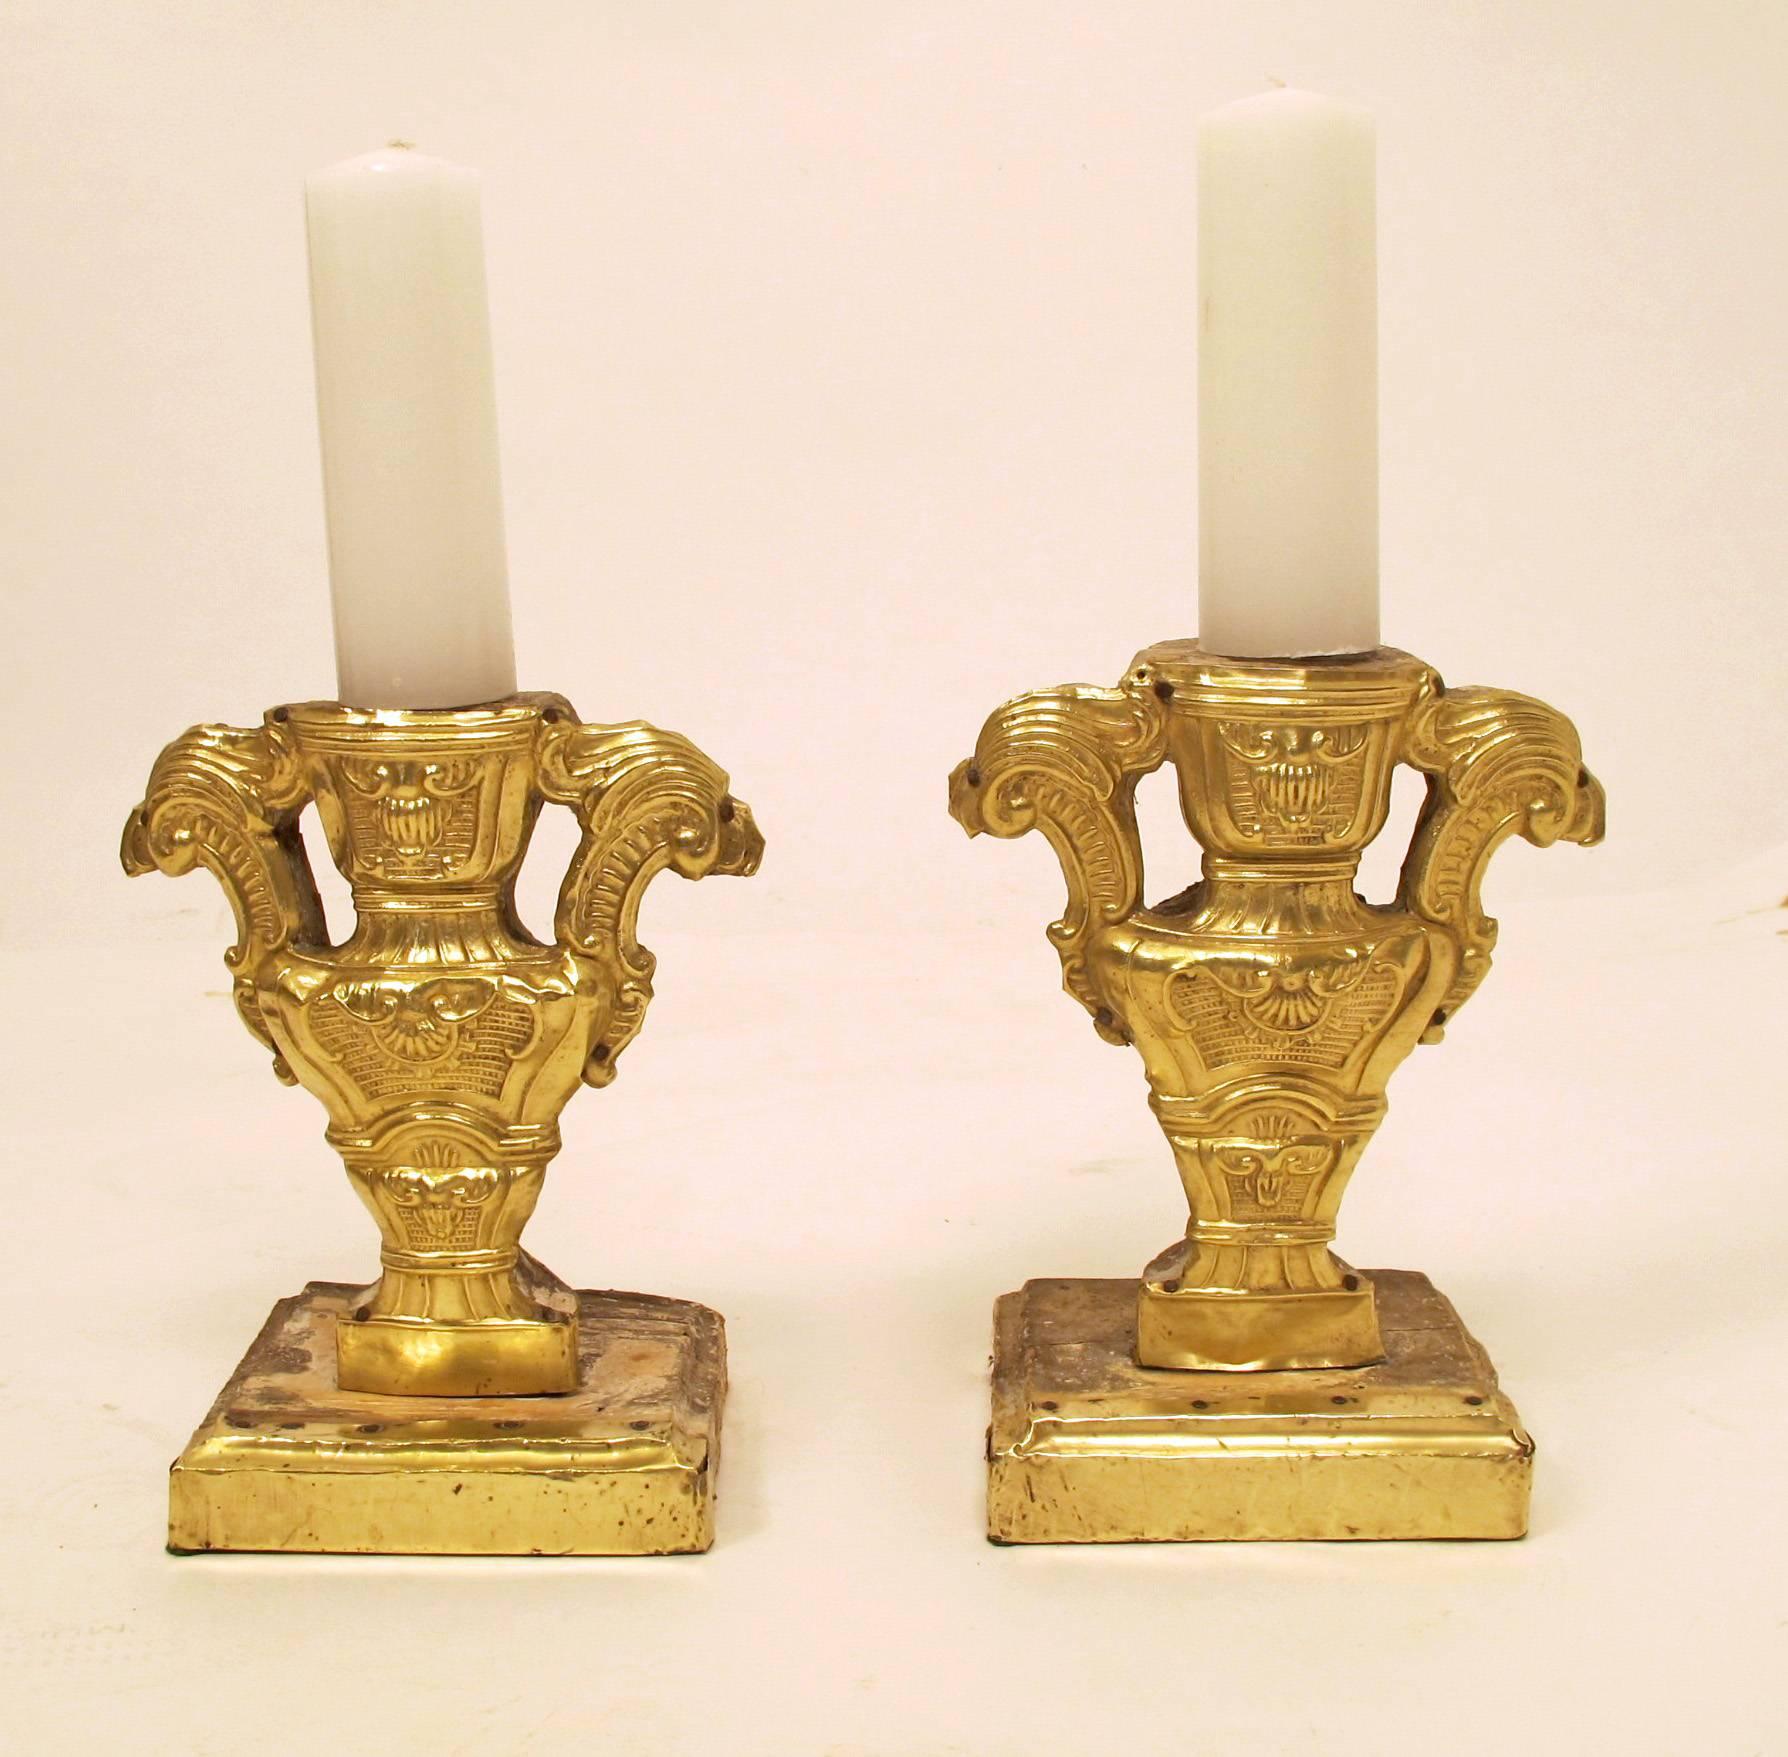 Pair of outstanding 18th century brass over wood (repousse) pricket candleholders. Wood is hand-carved and painted, with the fronts covered (repoussed) in brass. Candles are placed on an iron spear on the top of each holder. (Candleholders with